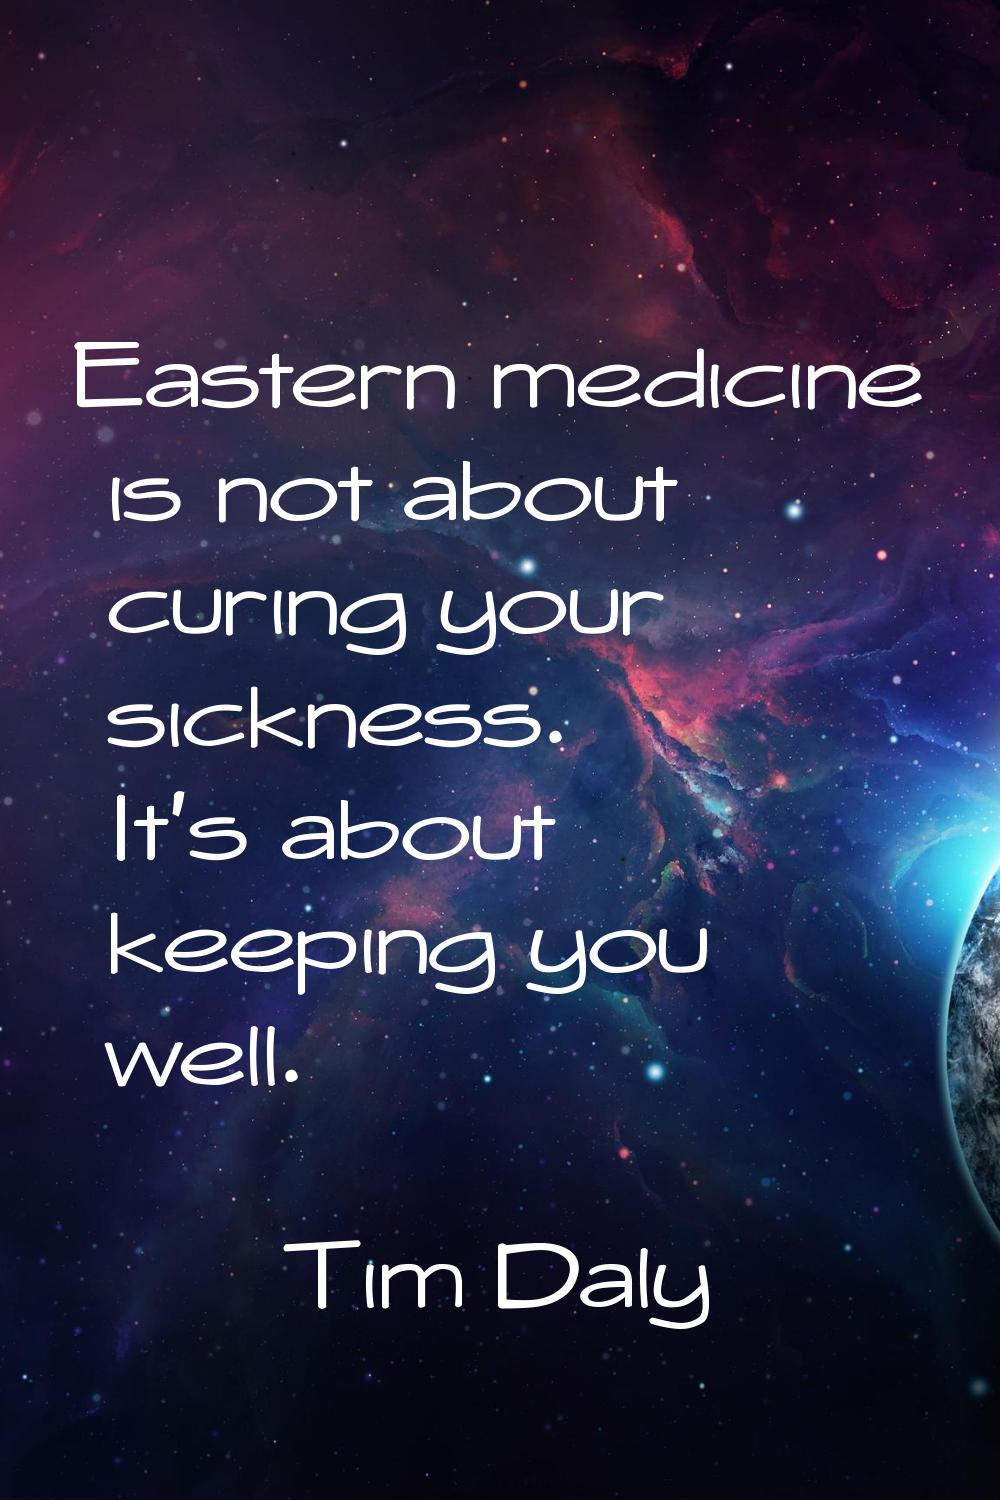 Eastern medicine is not about curing your sickness. It's about keeping you well.